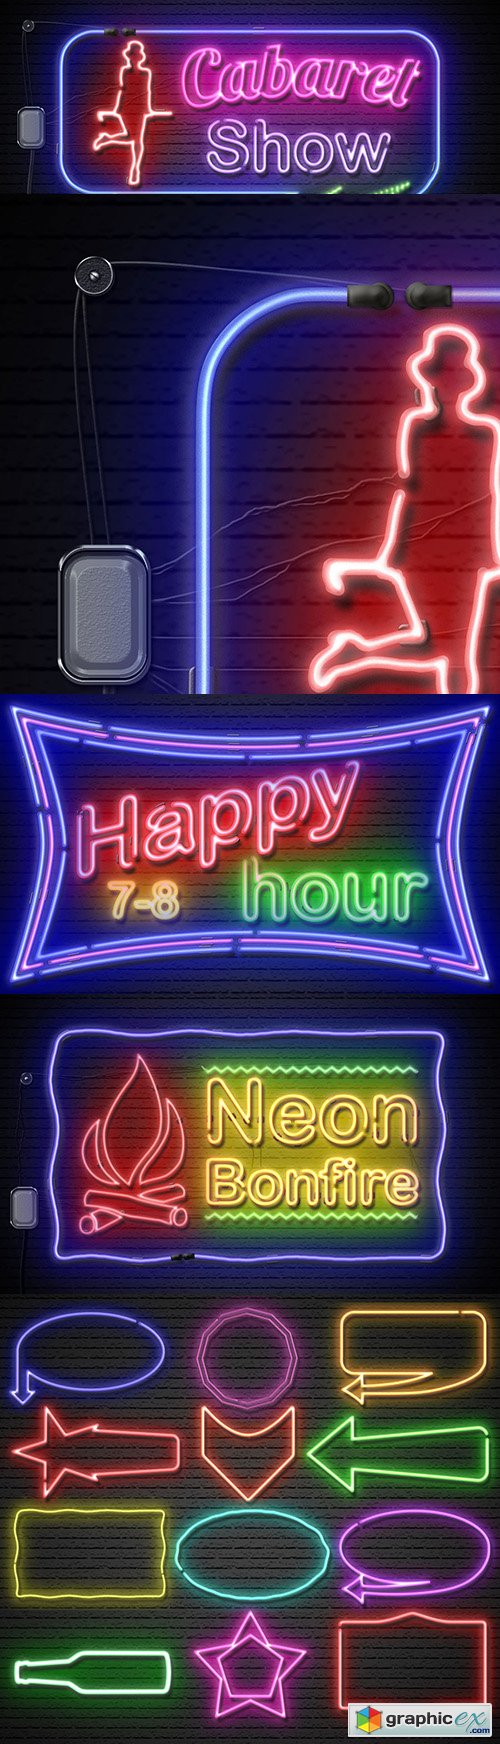 Complete Neon Signage Kit